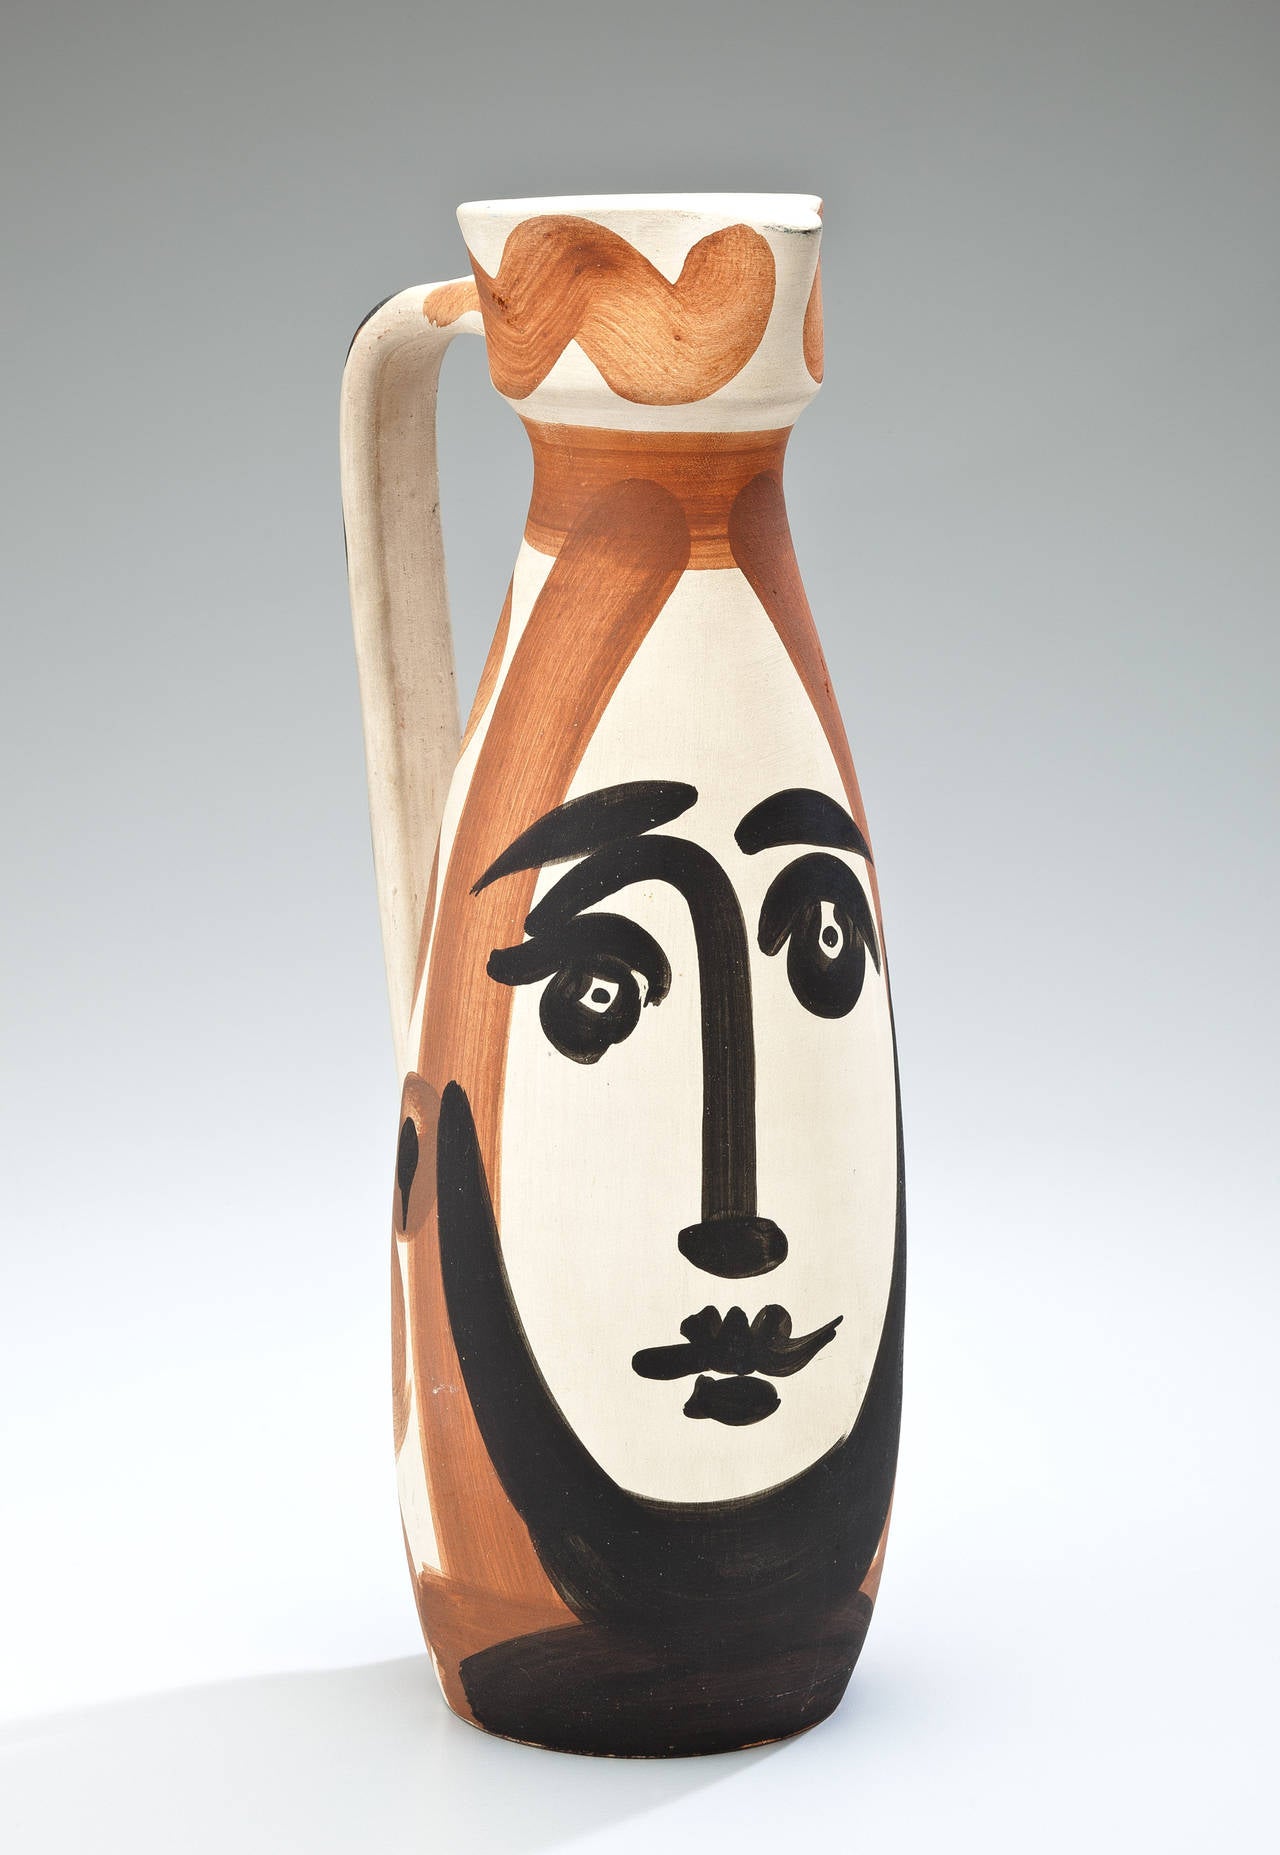 A glazed ceramic pitcher by Pablo Picasso in black, white and brownish red matte glaze, circa 1955. Edition of 500. Signed on the base Edition Picasso Madoura. The pitcher is also signed with the impressed Madoura and Edition Picasso stamps on the